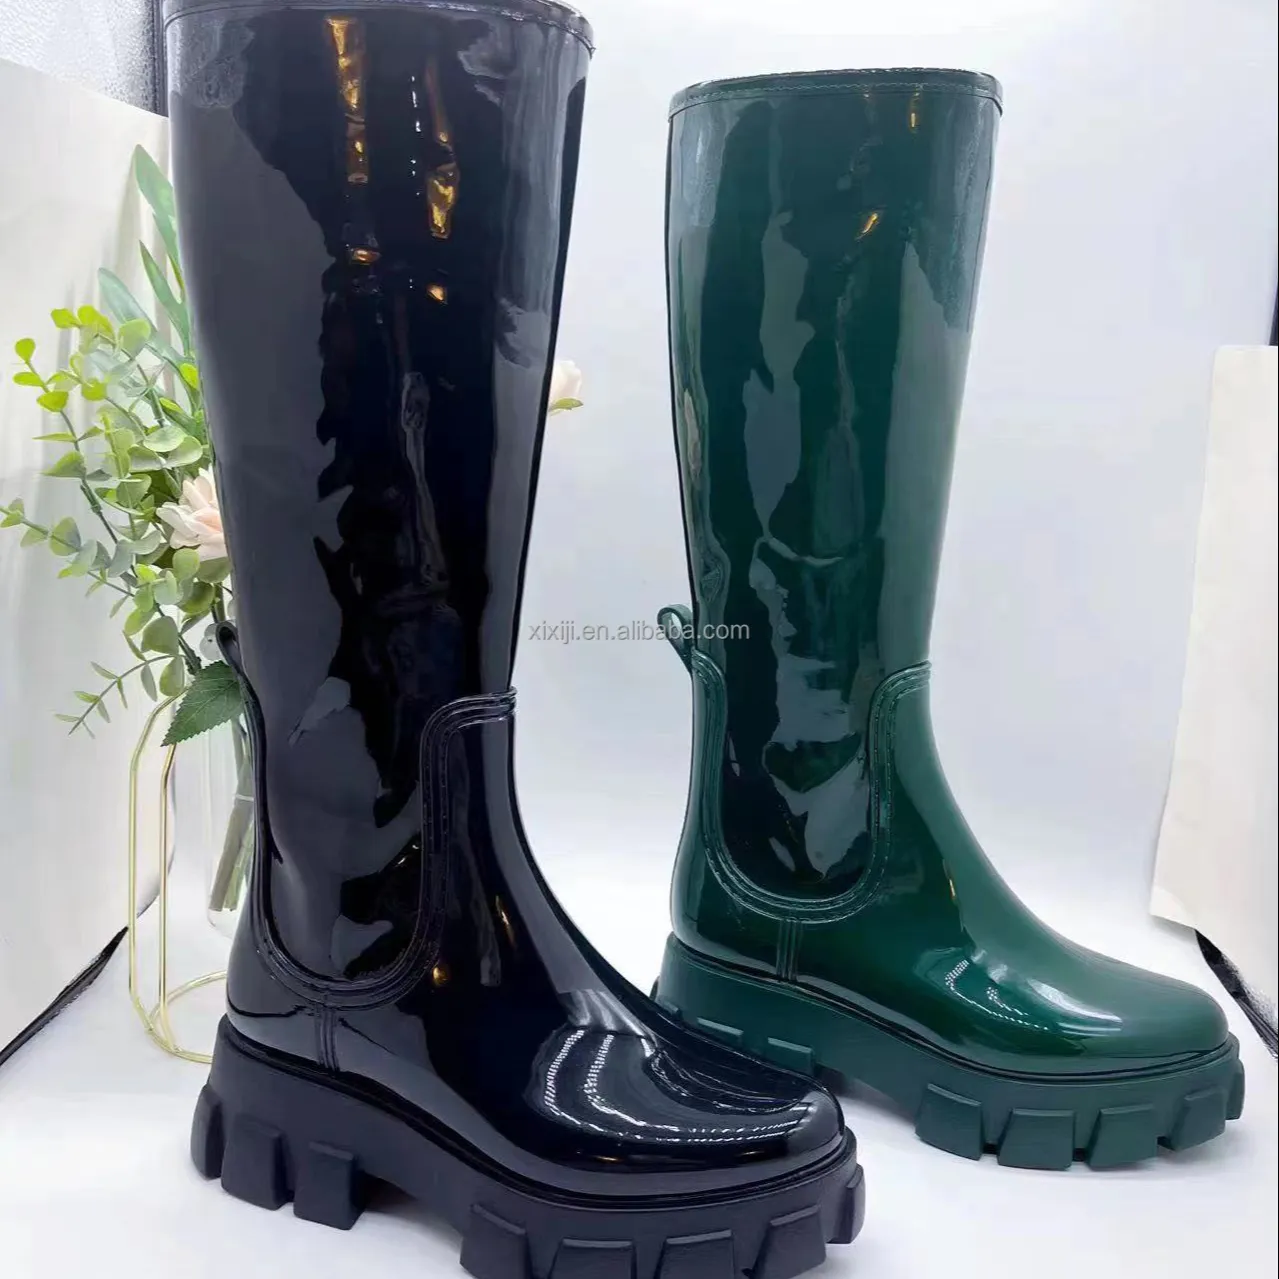 Fashion Design Boots Shoes Pointy Toe Knee High Boots High Heel for Women Zip Custom galoshes rain boots